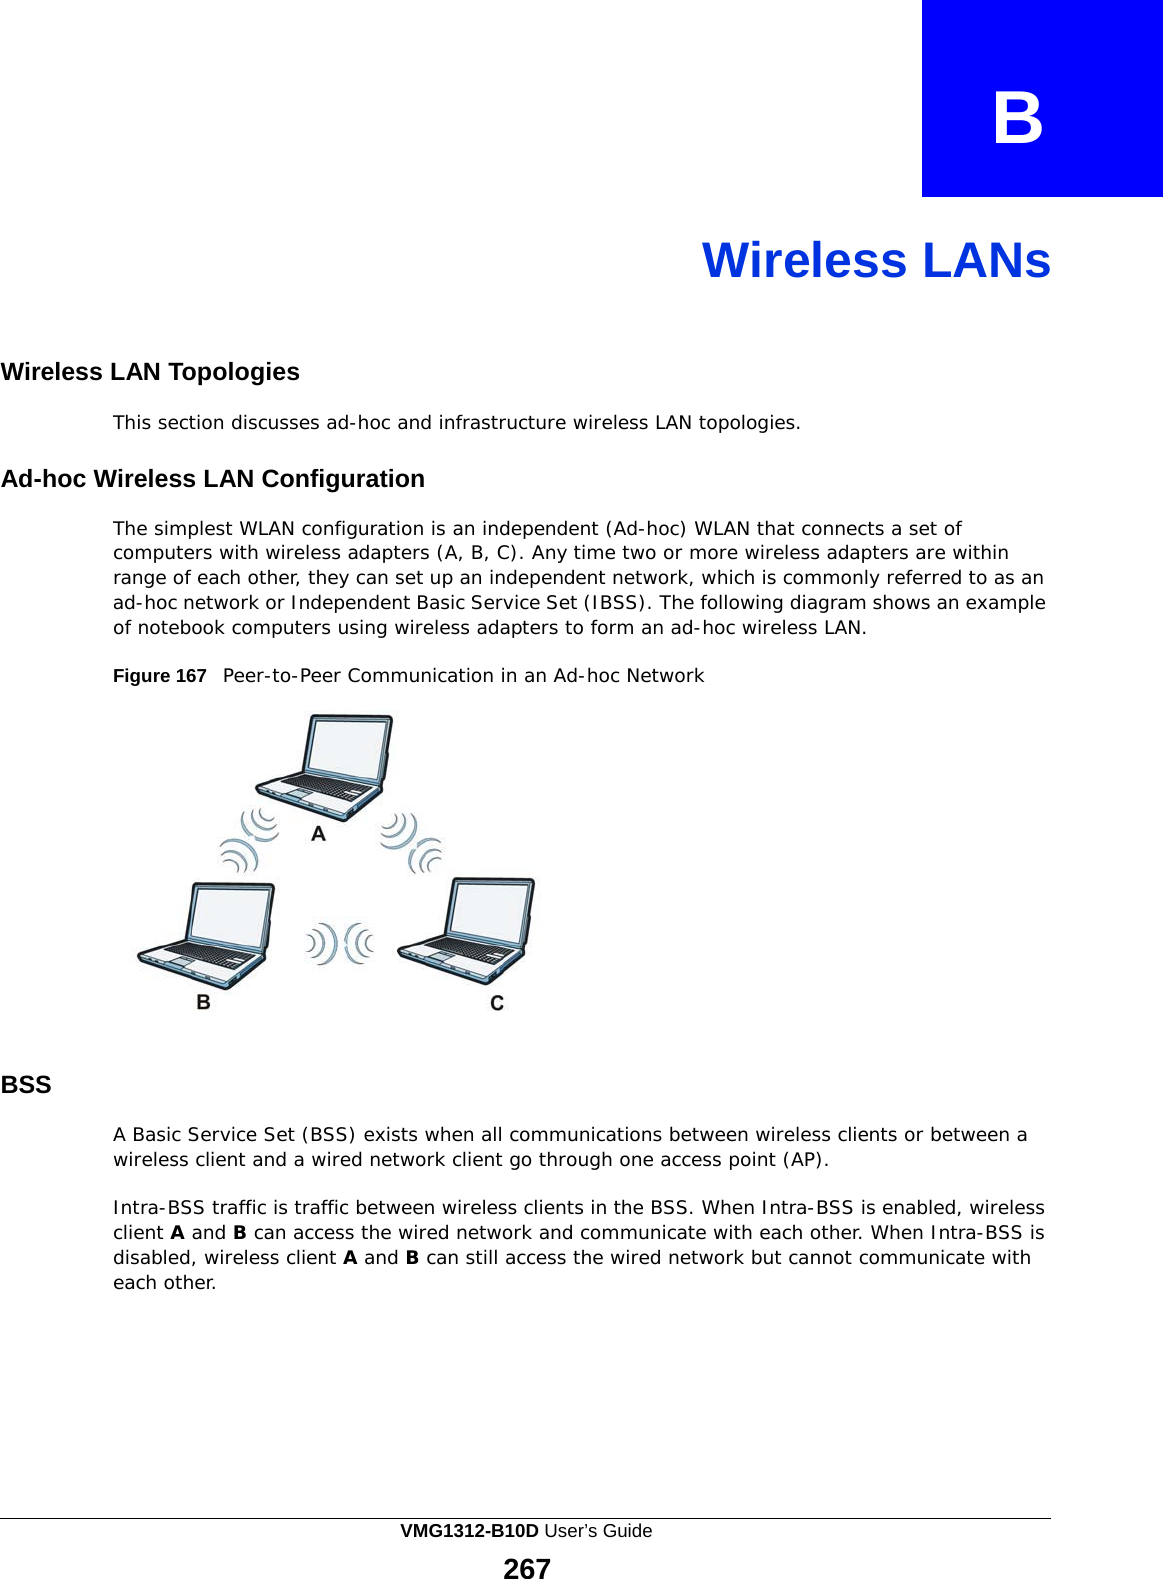  B    Wireless LANs    Wireless LAN Topologies  This section discusses ad-hoc and infrastructure wireless LAN topologies.  Ad-hoc Wireless LAN Configuration  The simplest WLAN configuration is an independent (Ad-hoc) WLAN that connects a set of computers with wireless adapters (A, B, C). Any time two or more wireless adapters are within range of each other, they can set up an independent network, which is commonly referred to as an ad-hoc network or Independent Basic Service Set (IBSS). The following diagram shows an example of notebook computers using wireless adapters to form an ad-hoc wireless LAN.  Figure 167   Peer-to-Peer Communication in an Ad-hoc Network    BSS  A Basic Service Set (BSS) exists when all communications between wireless clients or between a wireless client and a wired network client go through one access point (AP).  Intra-BSS traffic is traffic between wireless clients in the BSS. When Intra-BSS is enabled, wireless client A and B can access the wired network and communicate with each other. When Intra-BSS is disabled, wireless client A and B can still access the wired network but cannot communicate with each other. VMG1312-B10D User’s Guide 267  